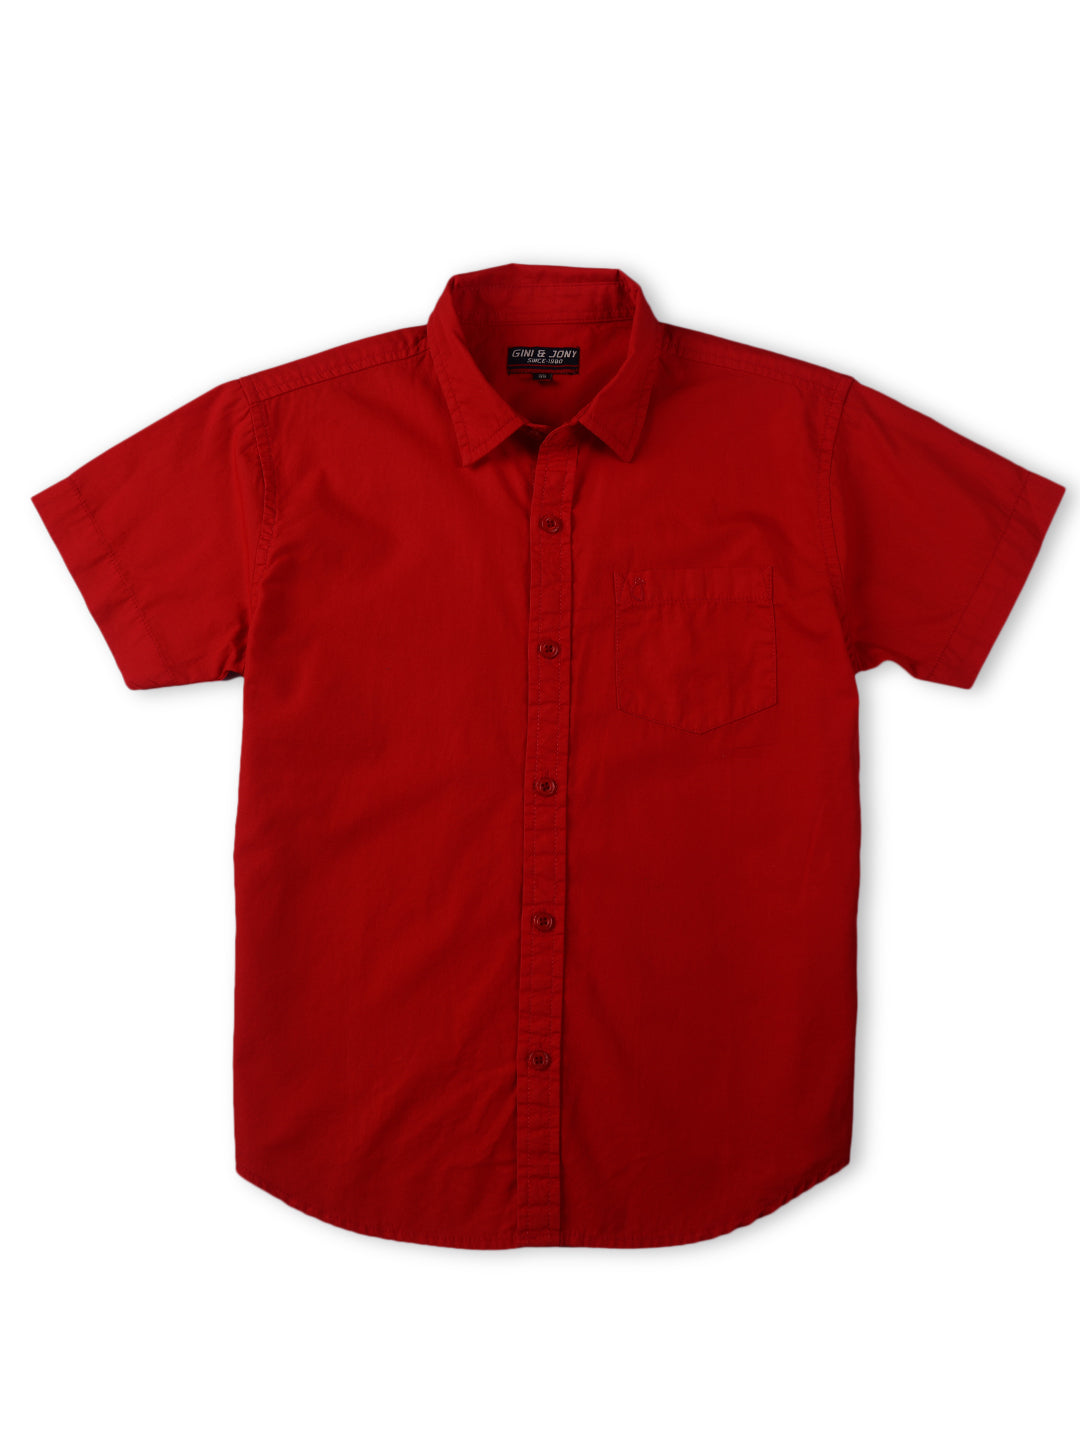 Boys Red Cotton Solid Shirt